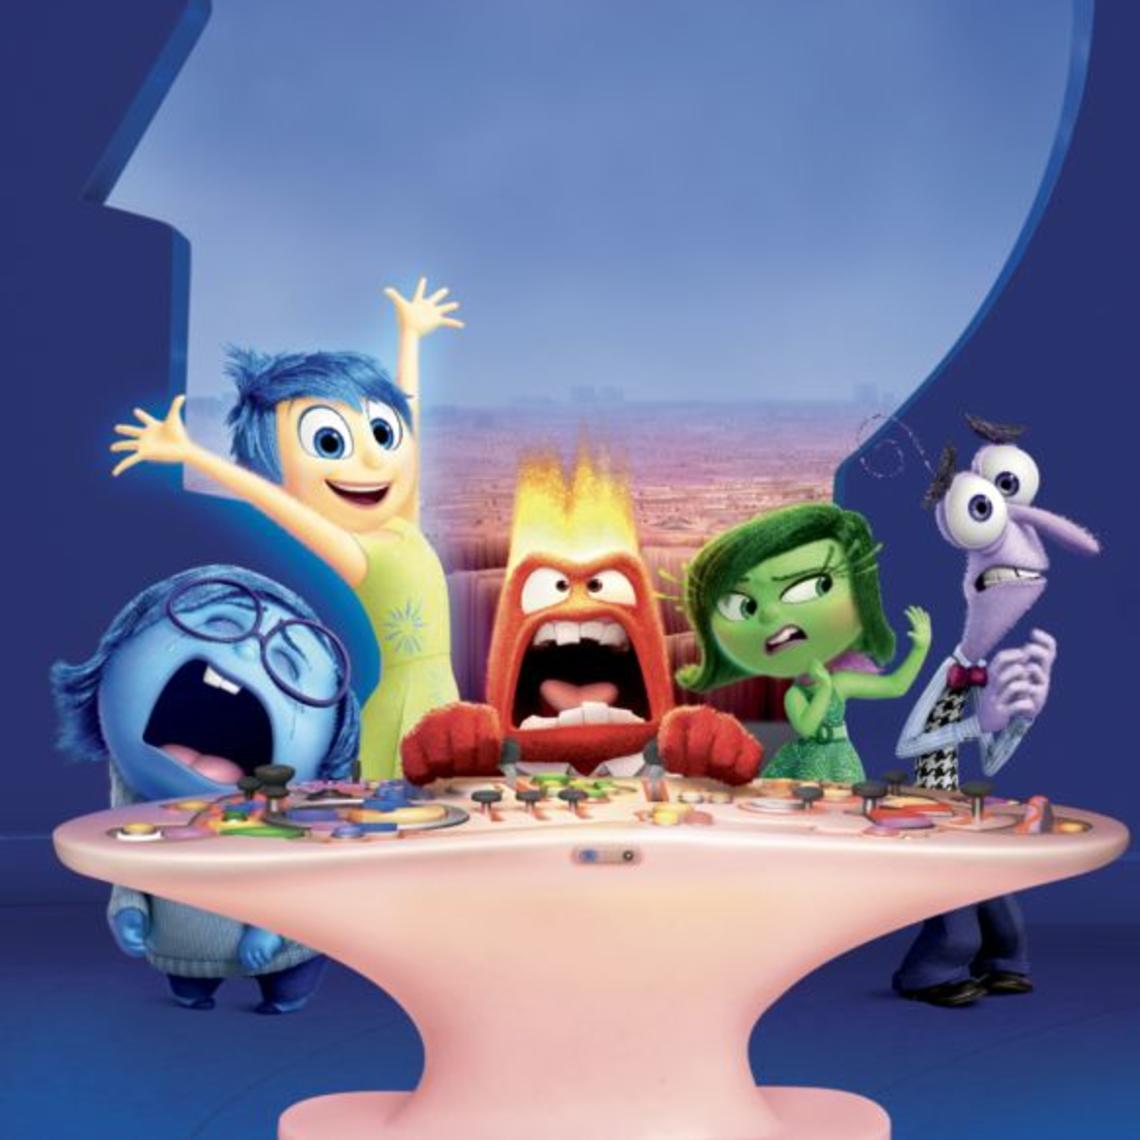 Image from the movie Inside Out